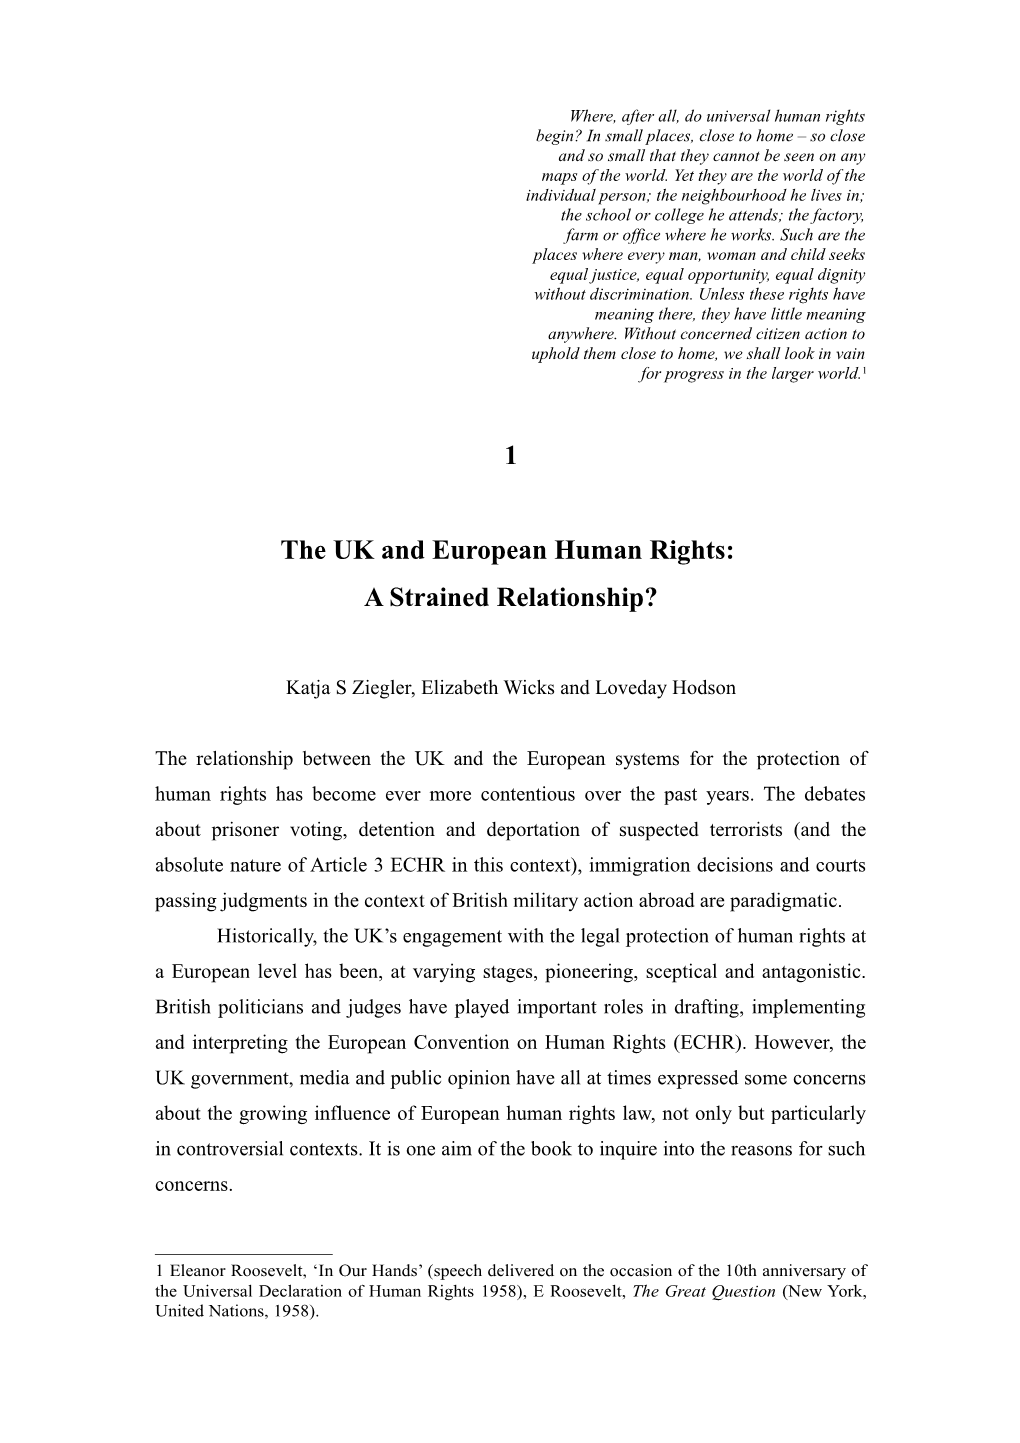 The UK and European Human Rights: a Strained Relationship?